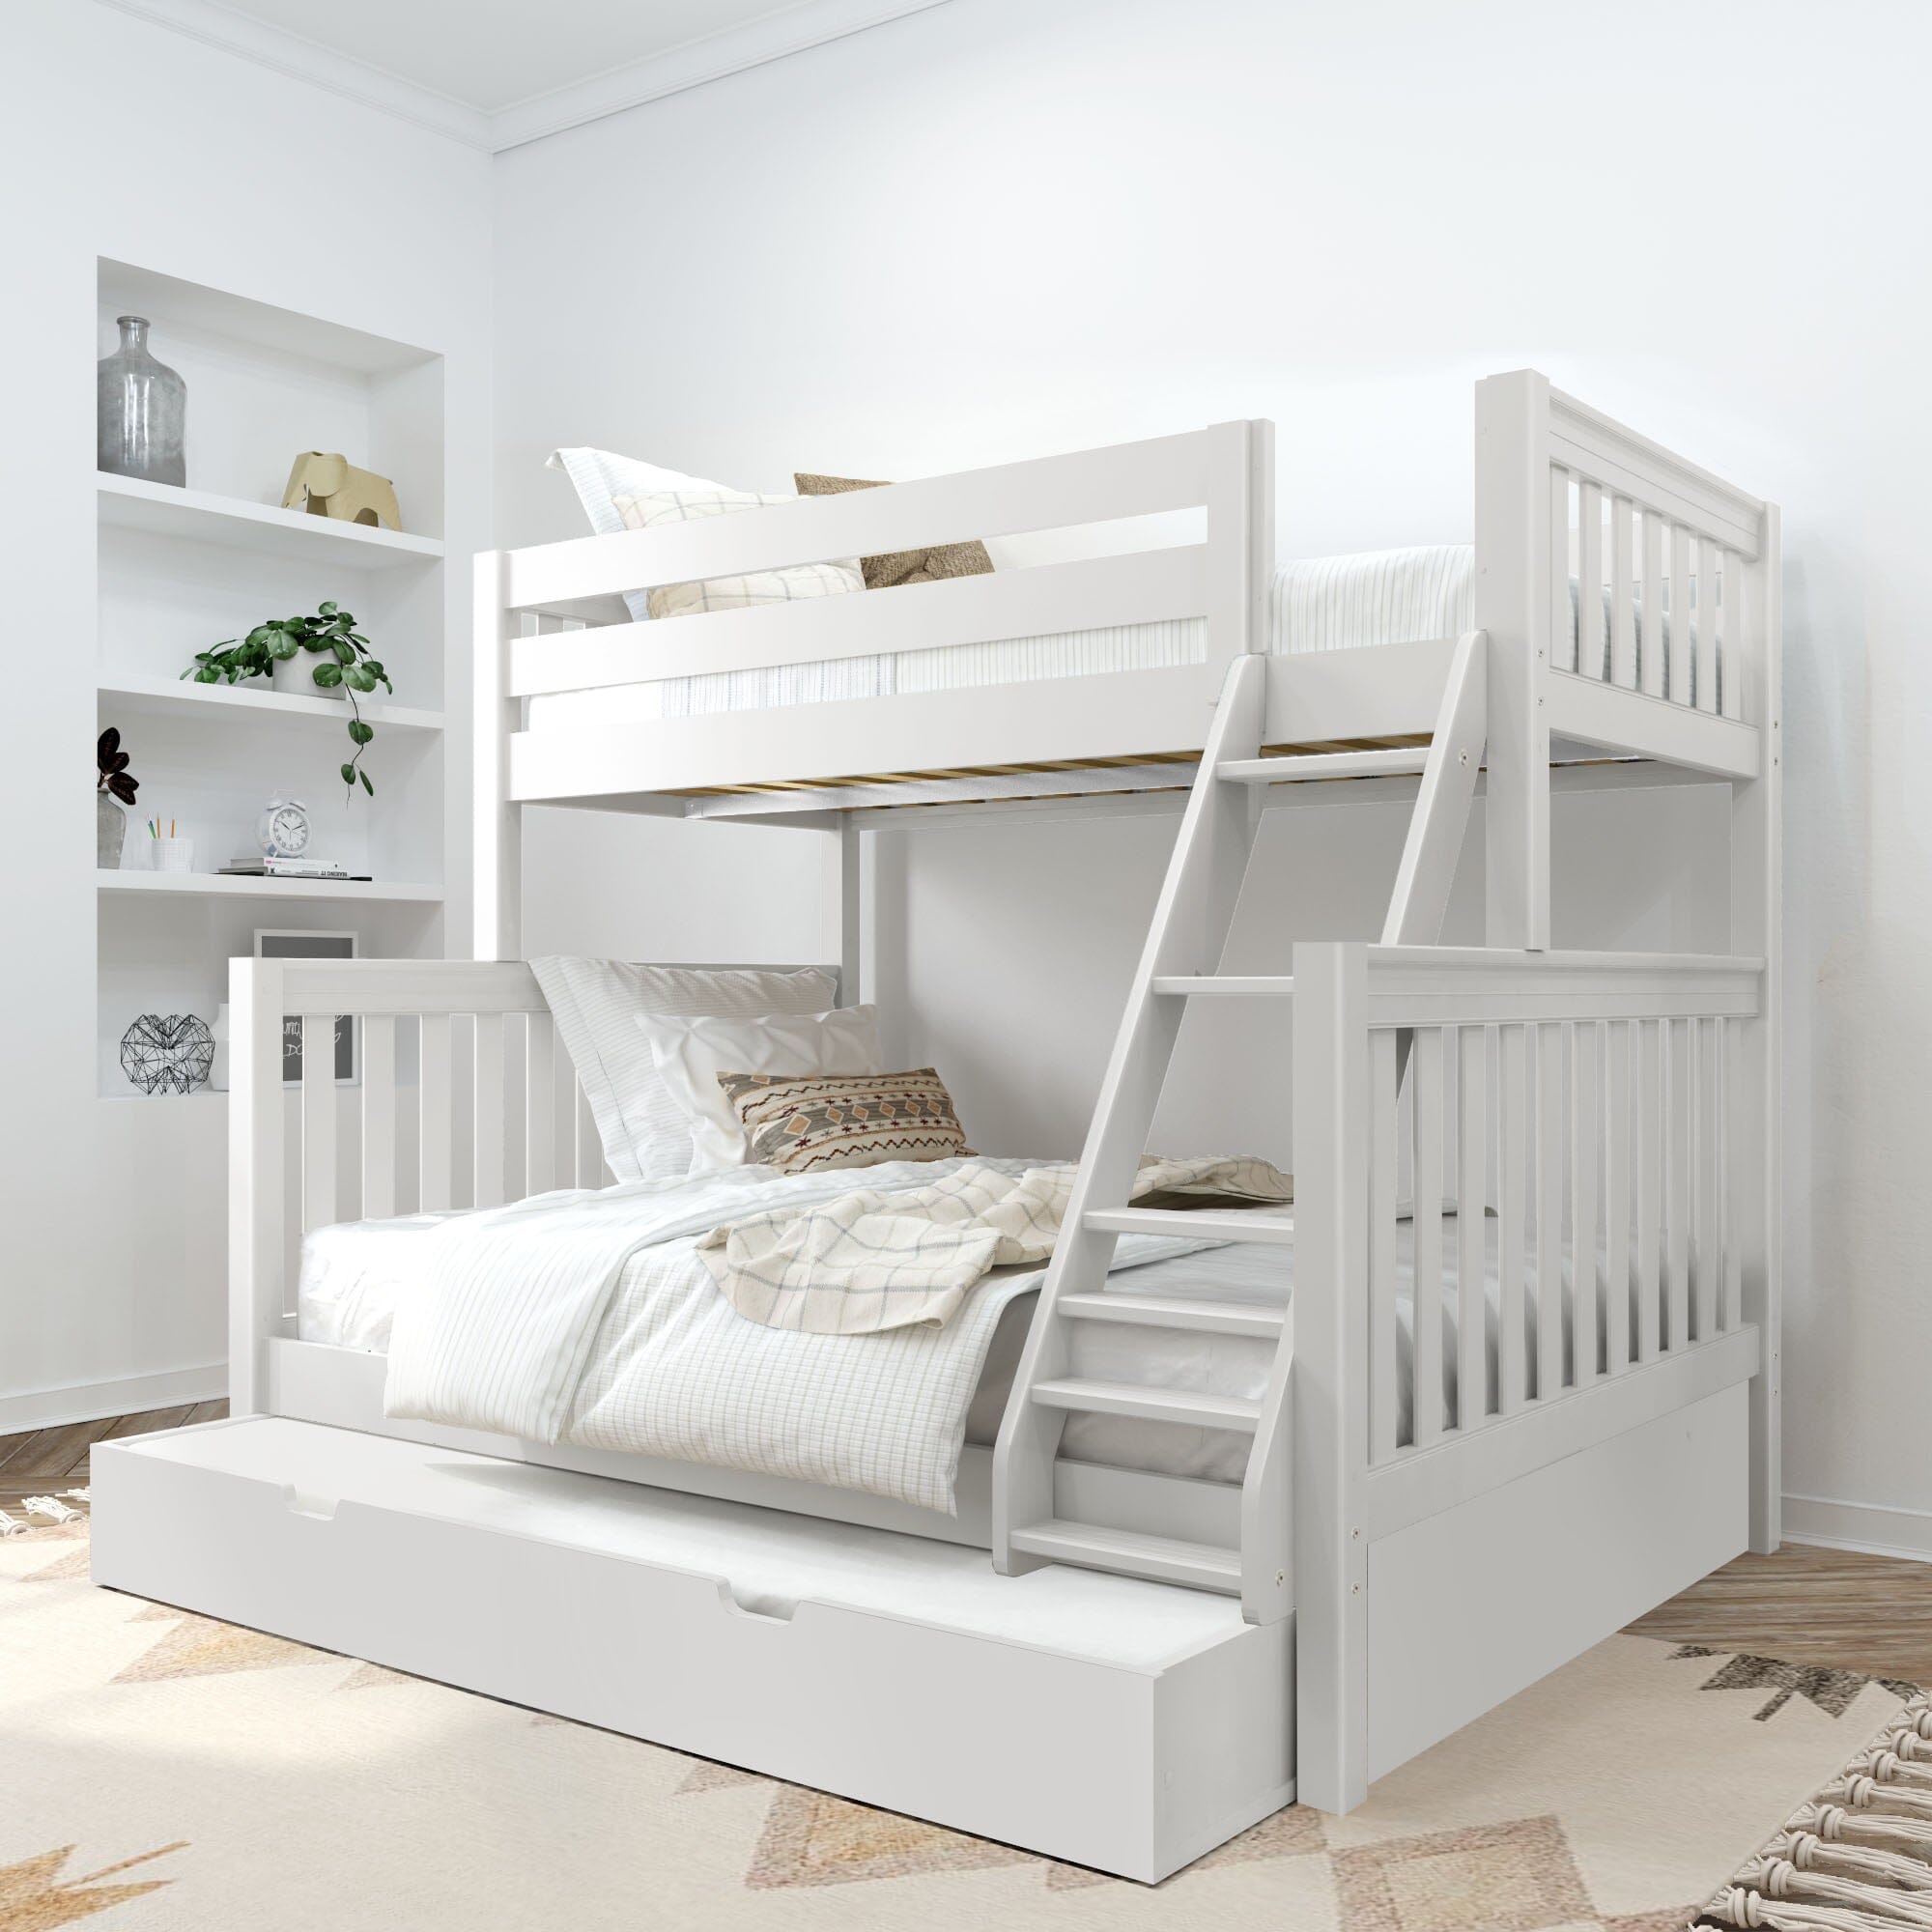 Image of Twin XL over Queen High Bunk Bed with Angled Ladder and Trundle Bed